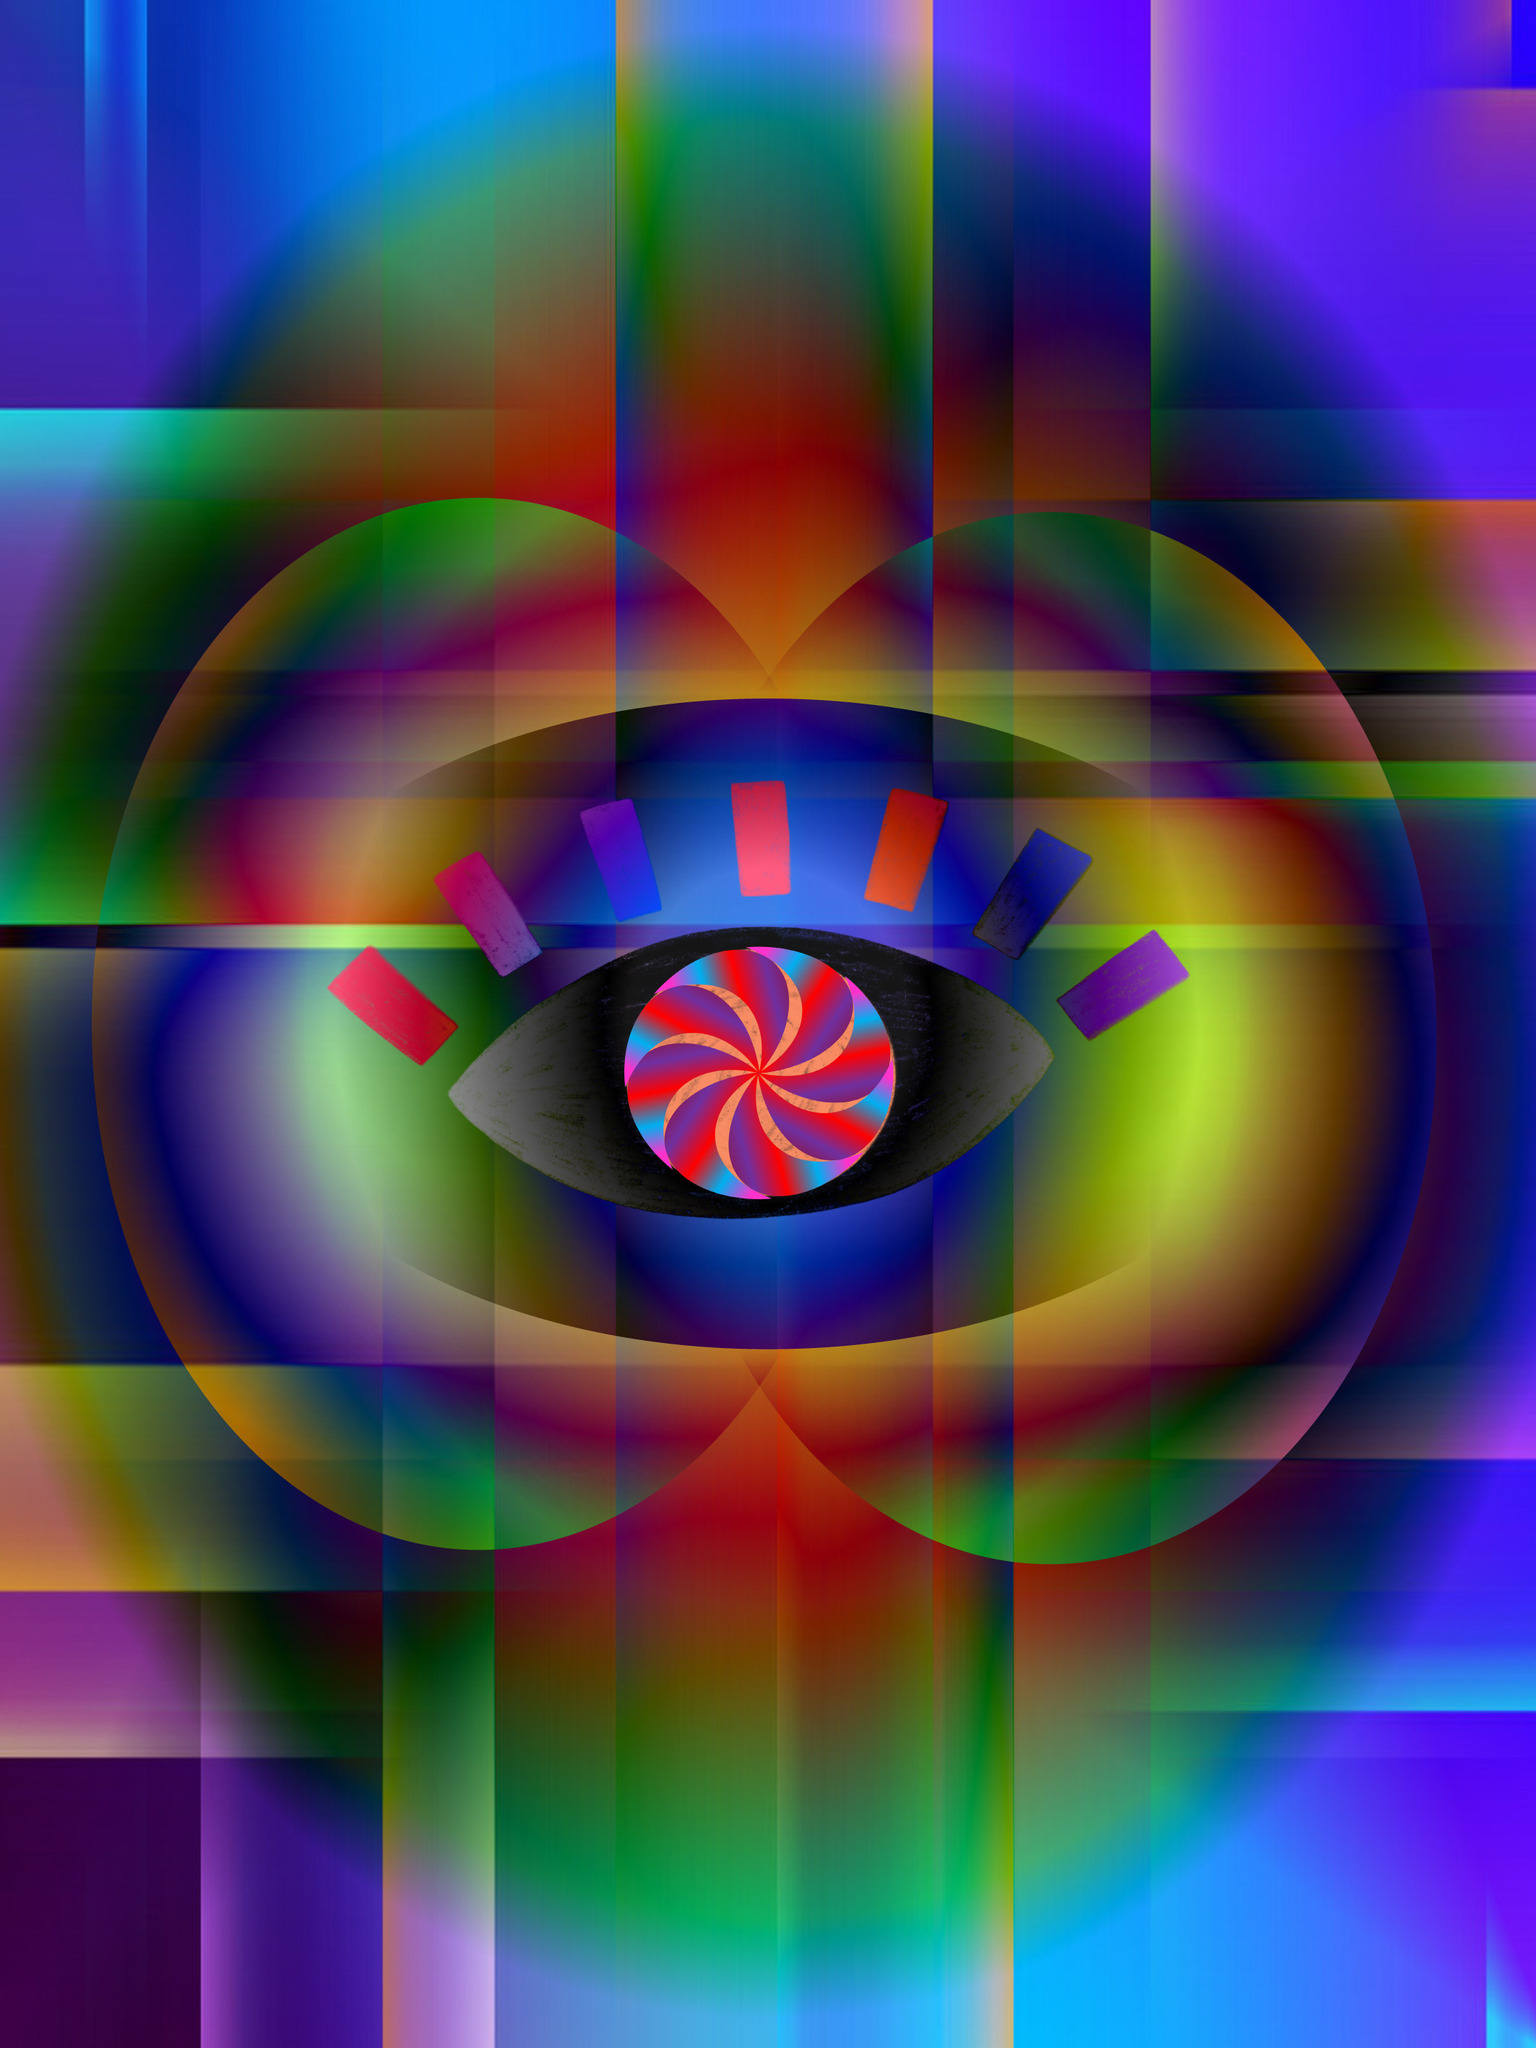 Graphic Art "Third eye and overall patterns"